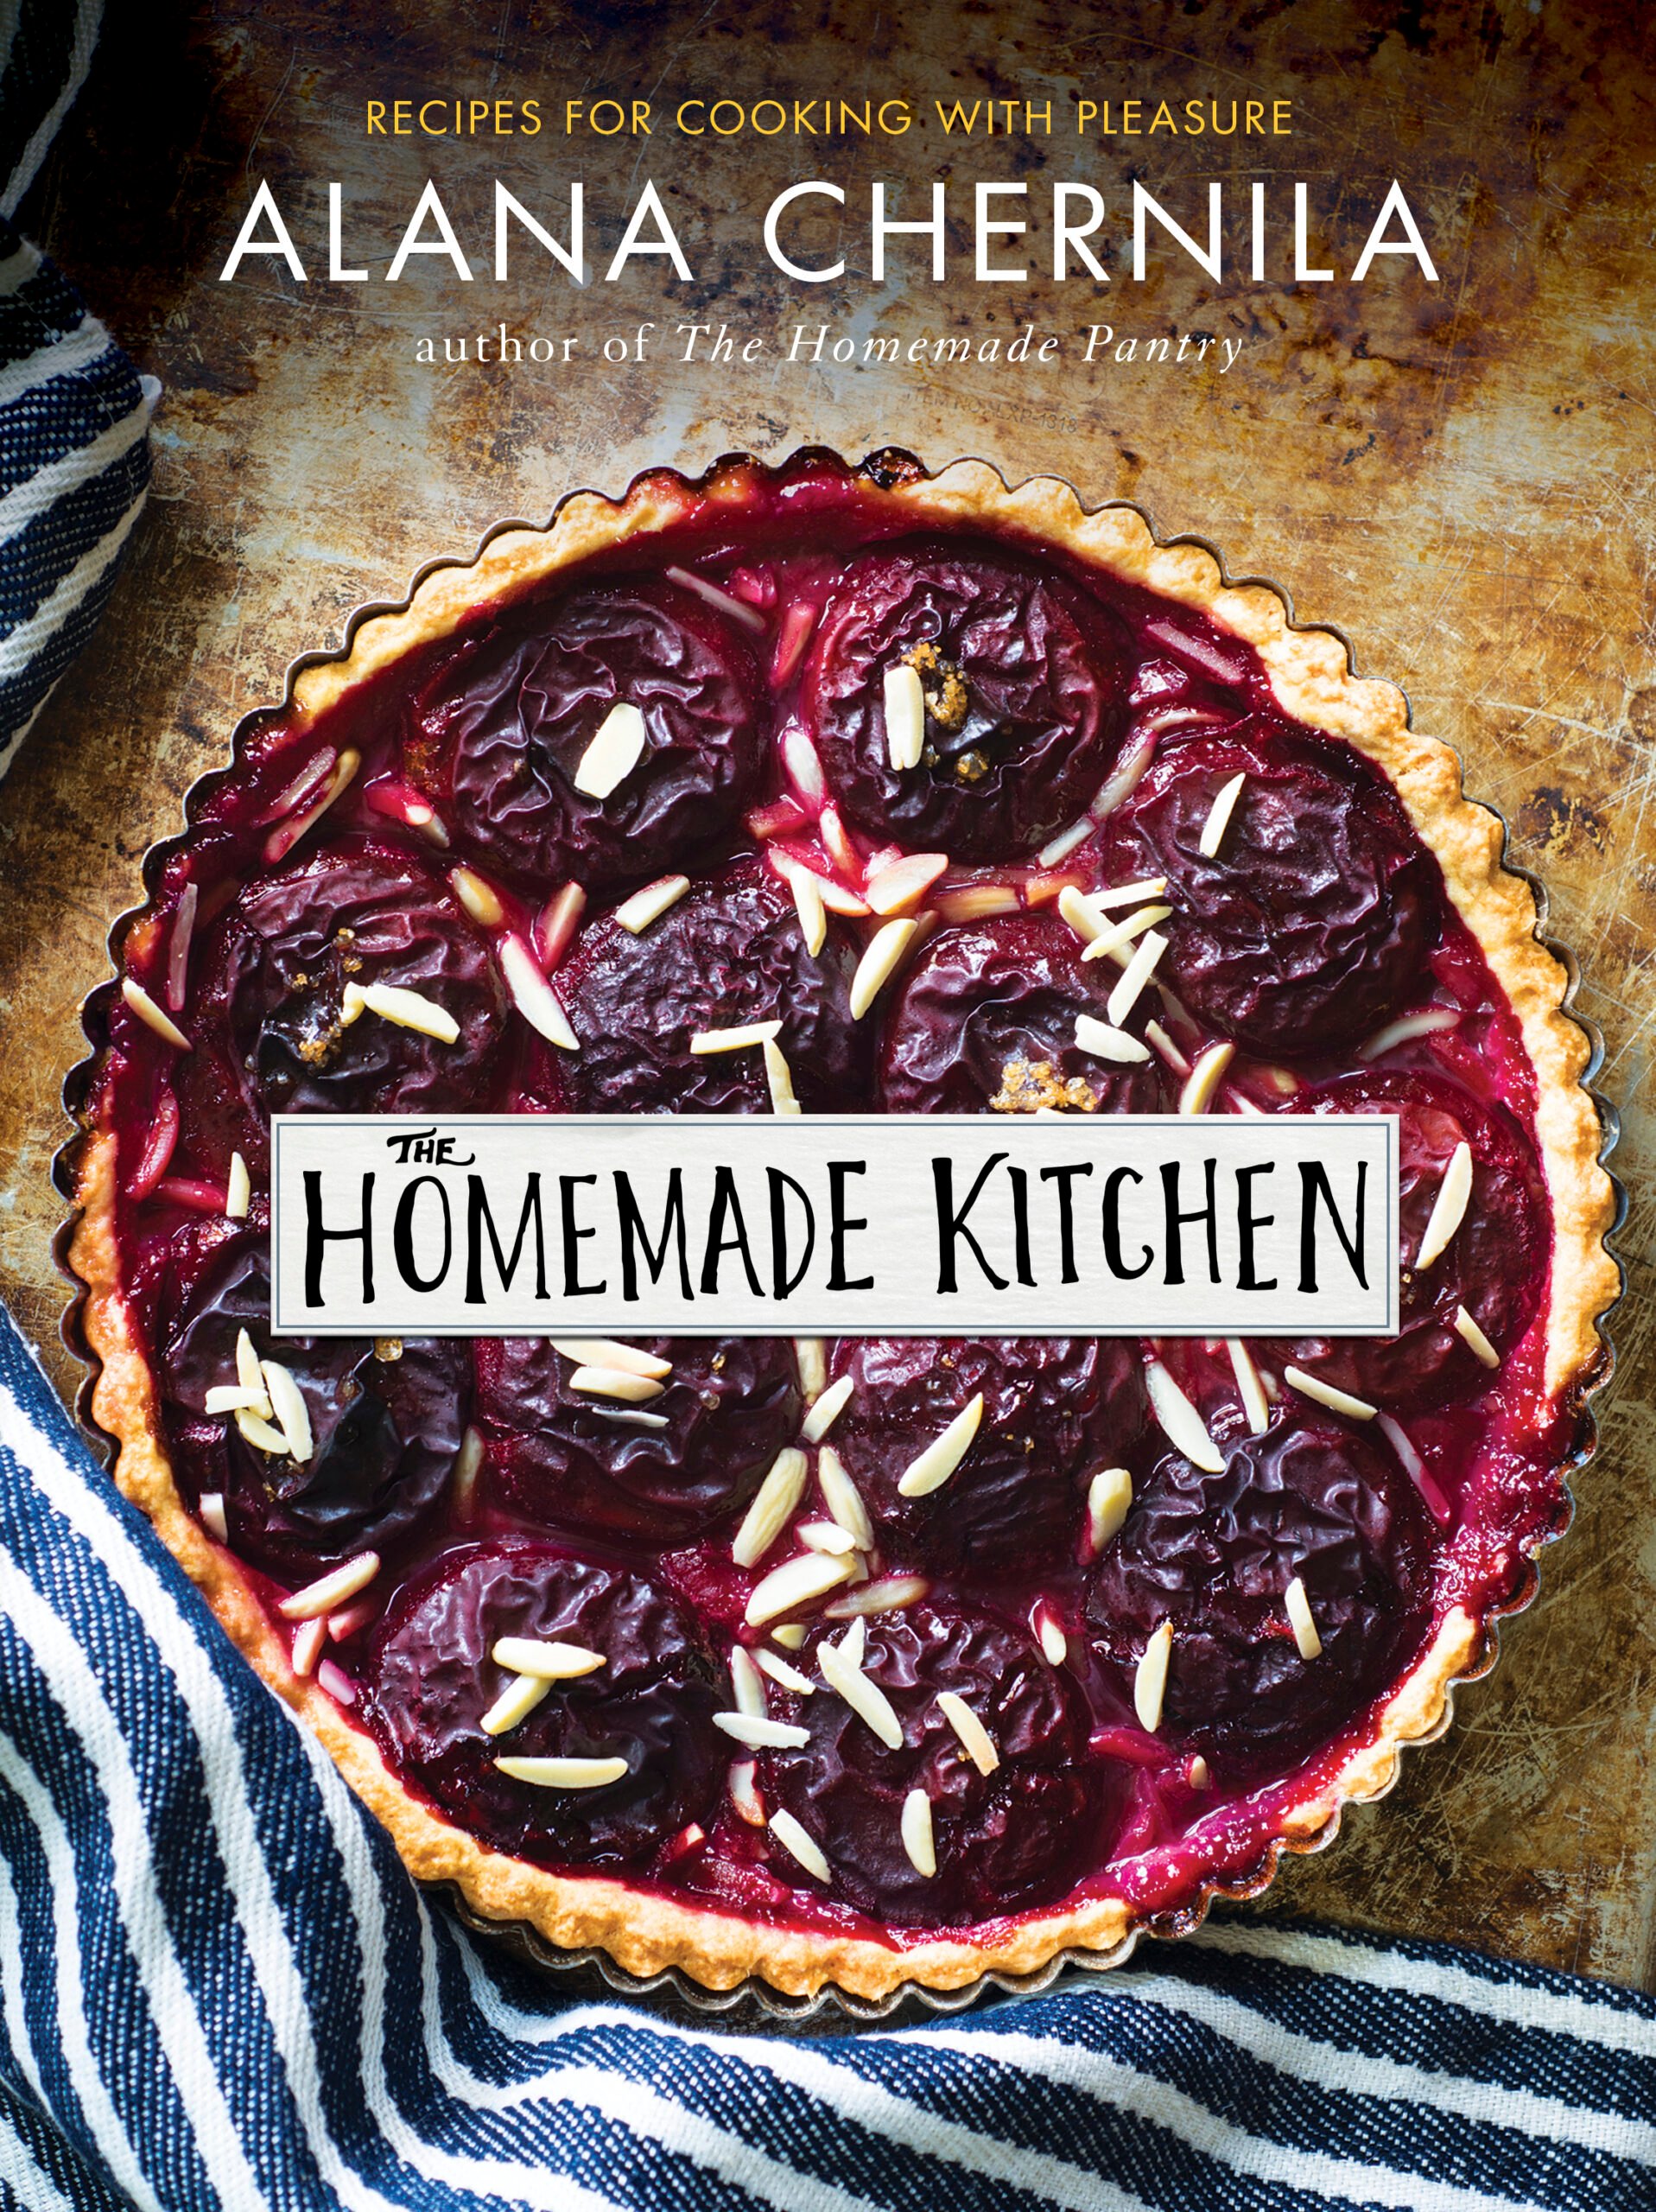 The cover of The Homemade Kitchen by Alana Chernila, spotlighting a  freshly baked pie, image by Jennifer May.